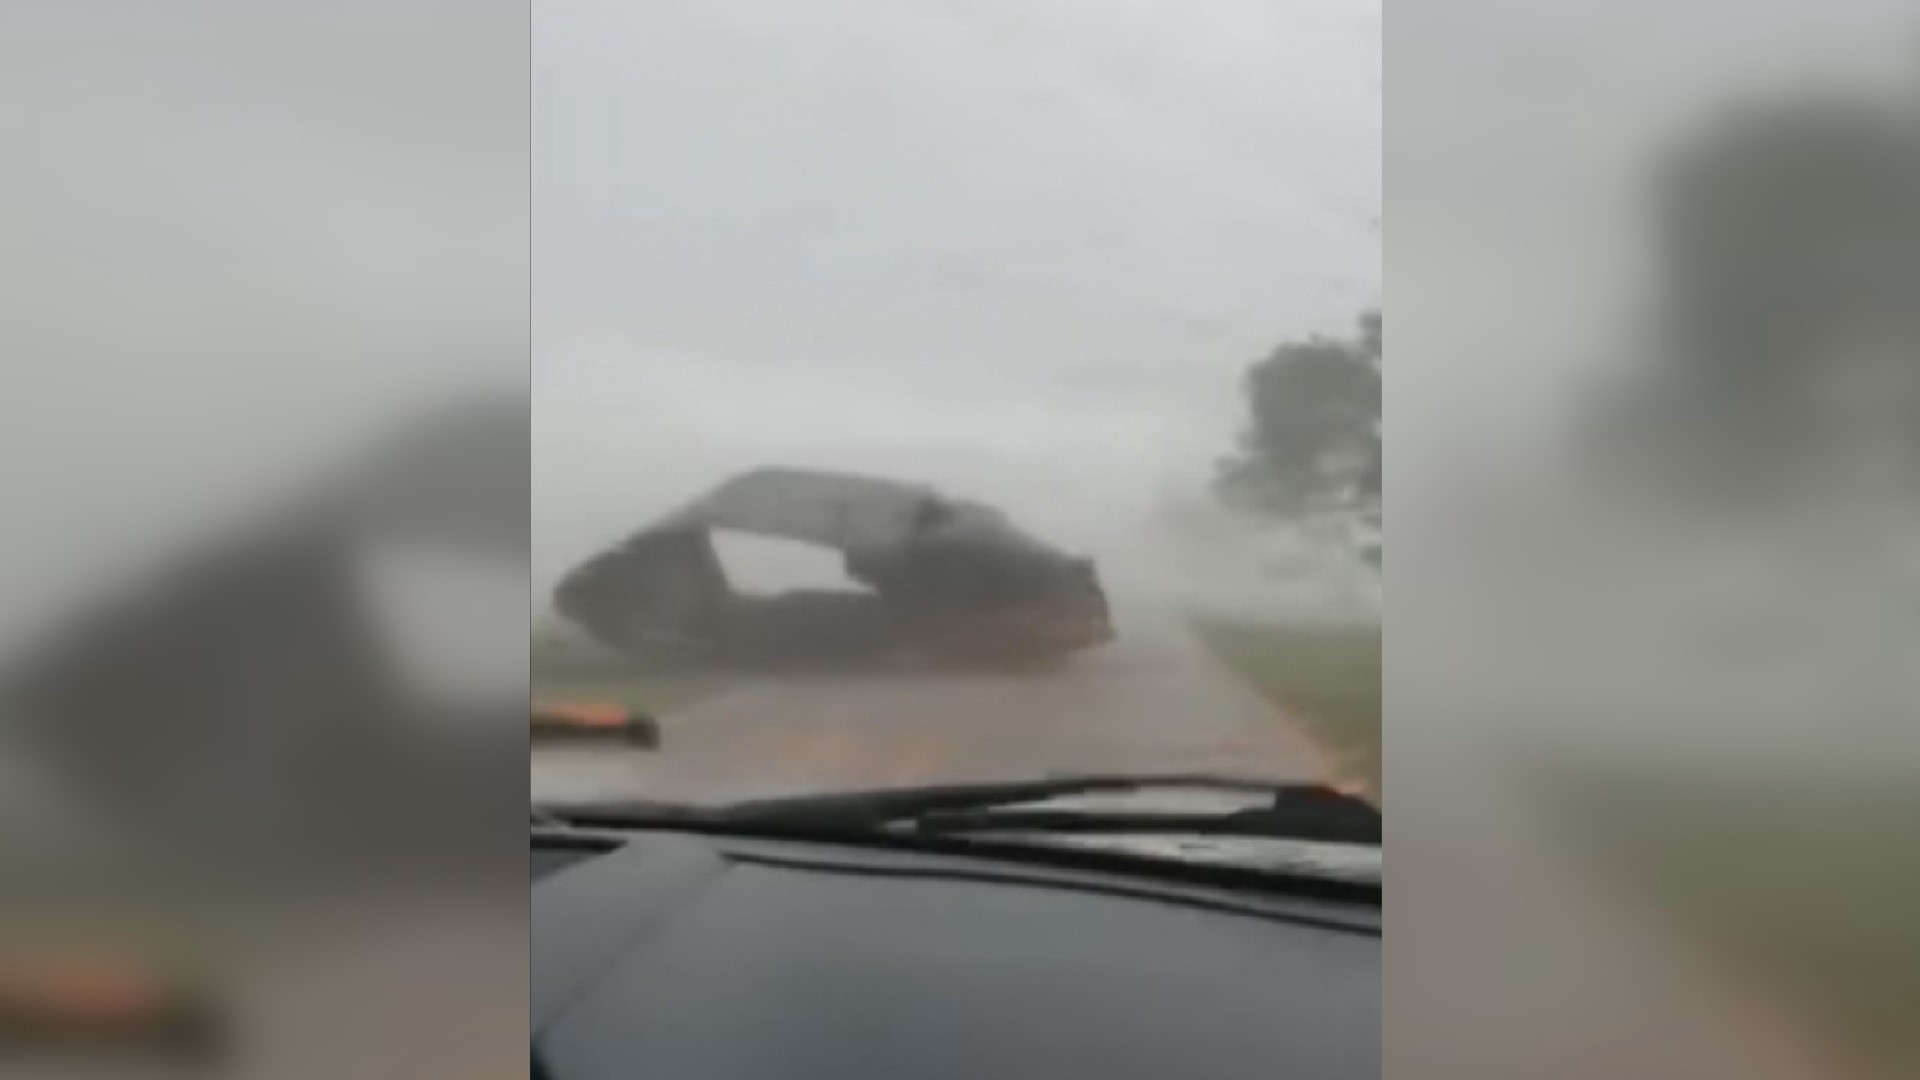 A South Carolina couple got stuck in high winds as a large tornado moved through the county.